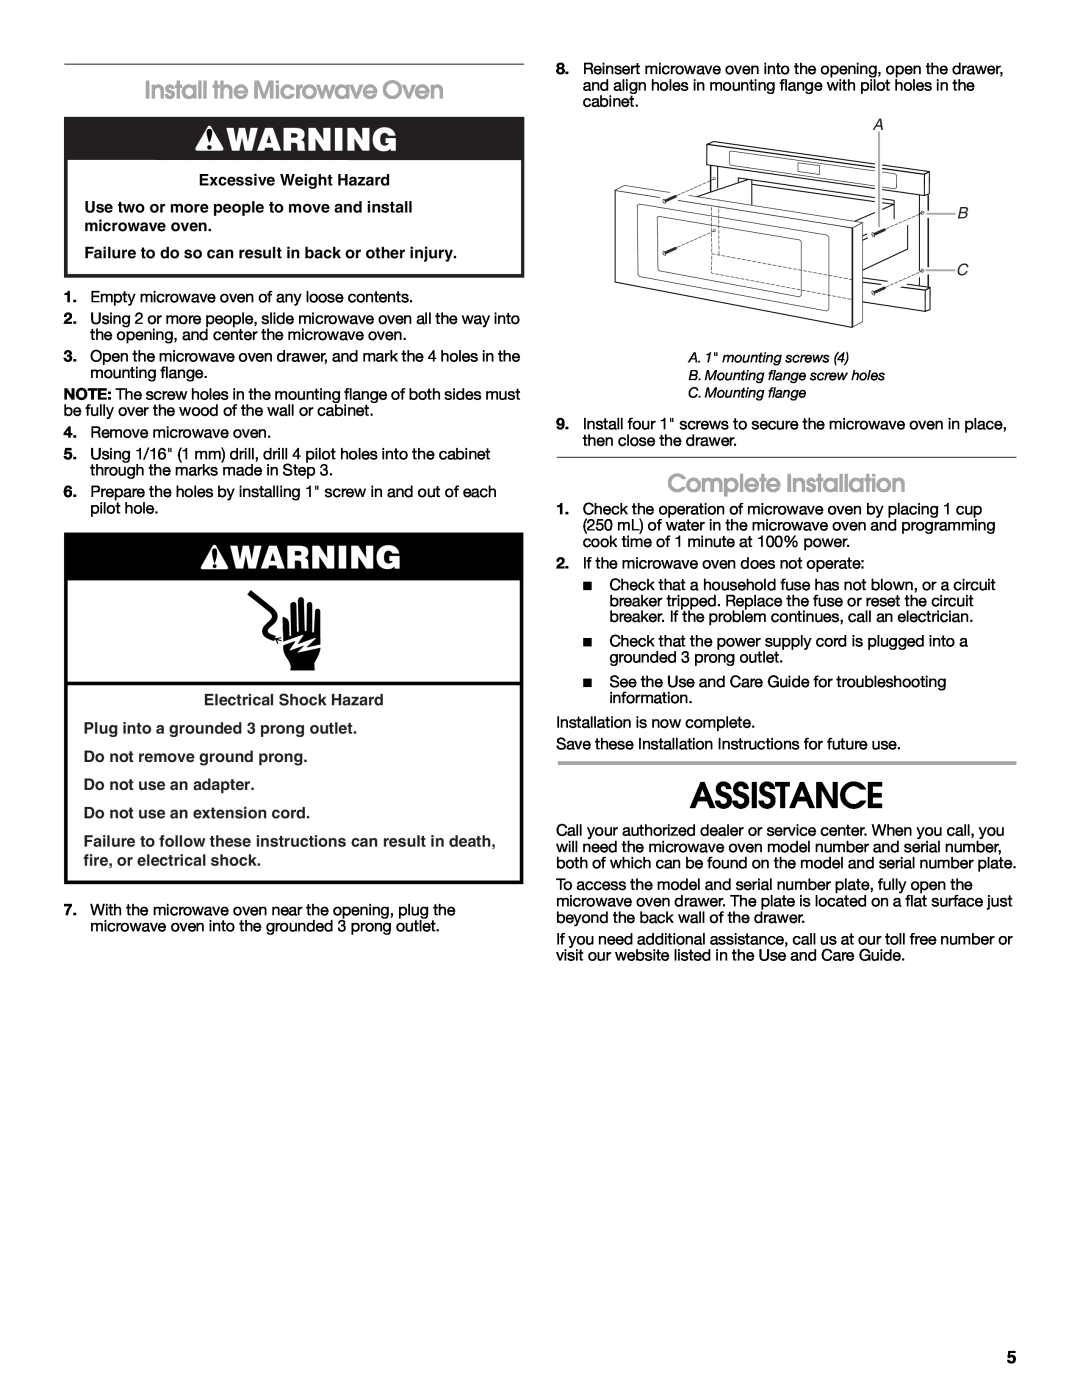 Whirlpool W10531851A installation instructions Assistance, Install the Microwave Oven, Complete Installation, A B C 